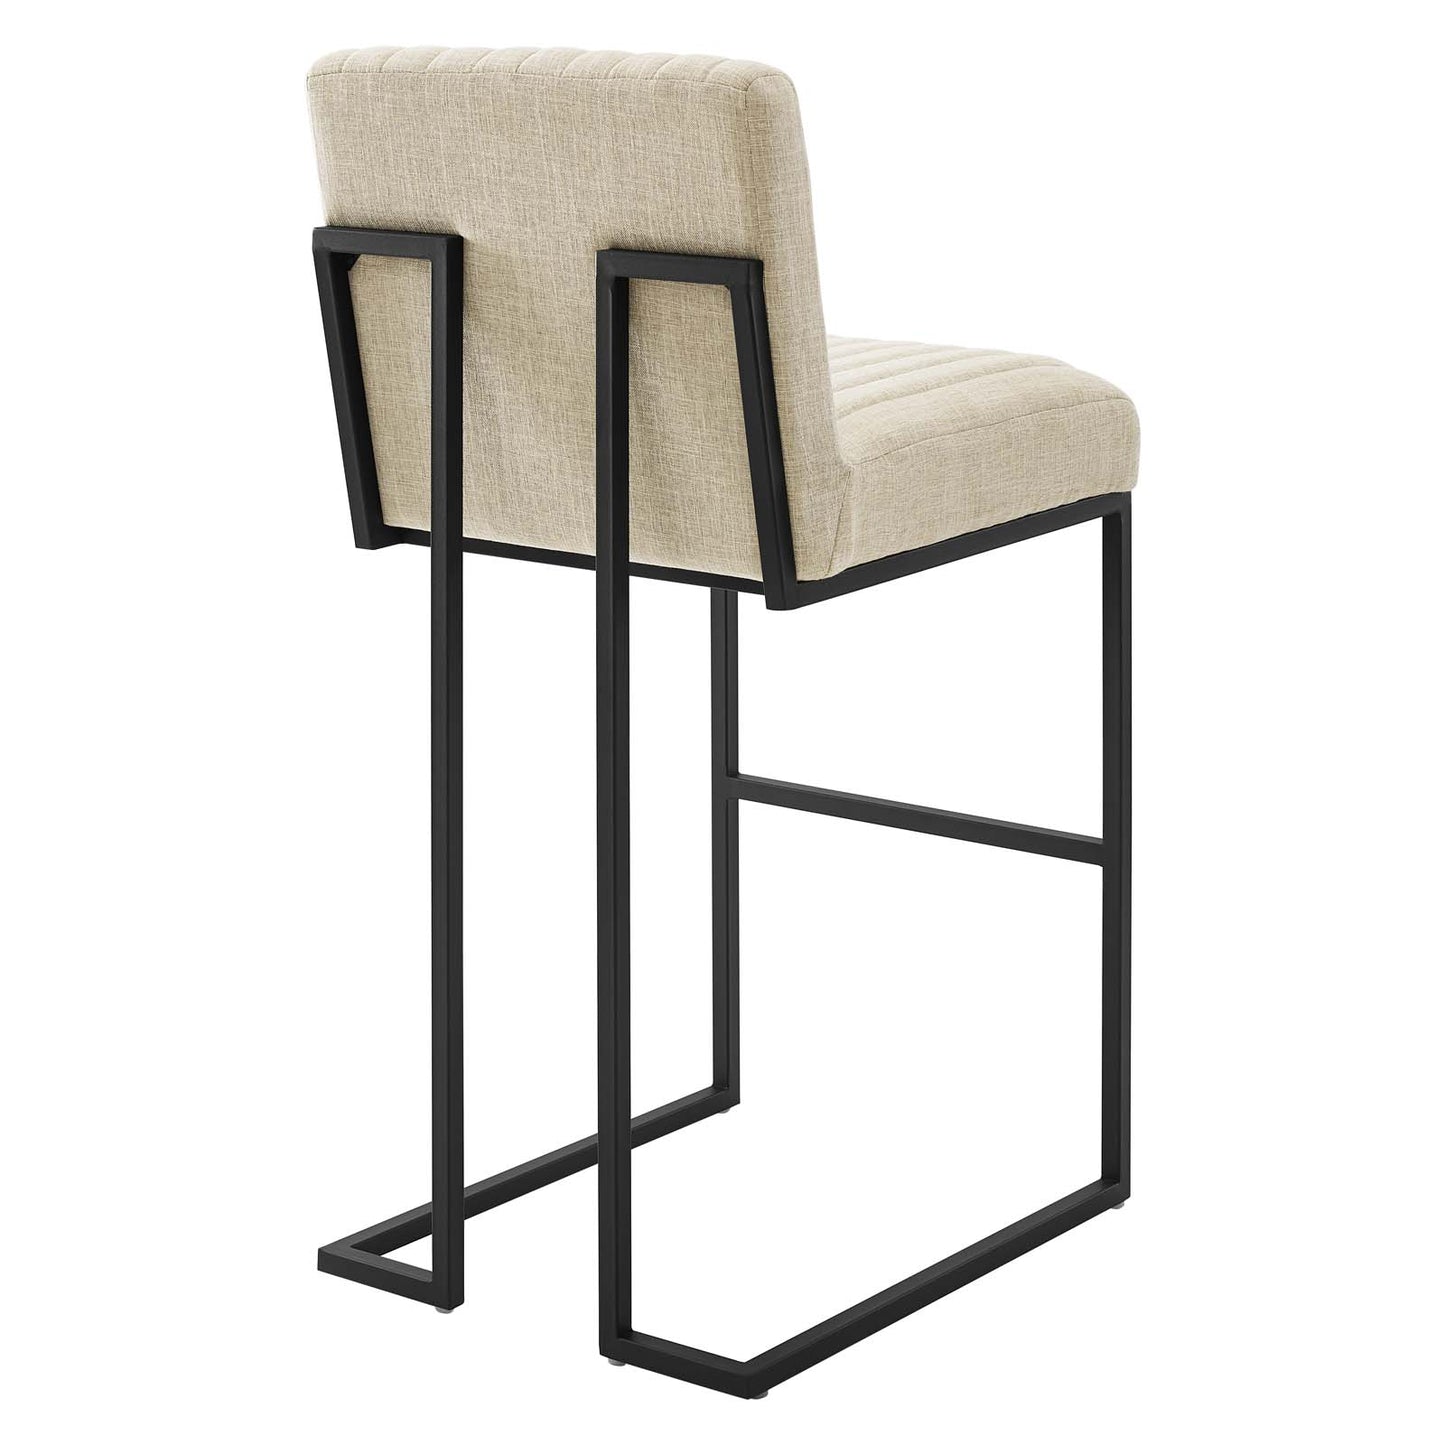 Indulge Channel Tufted Fabric Bar Stool Beige EEI-4654-BEI